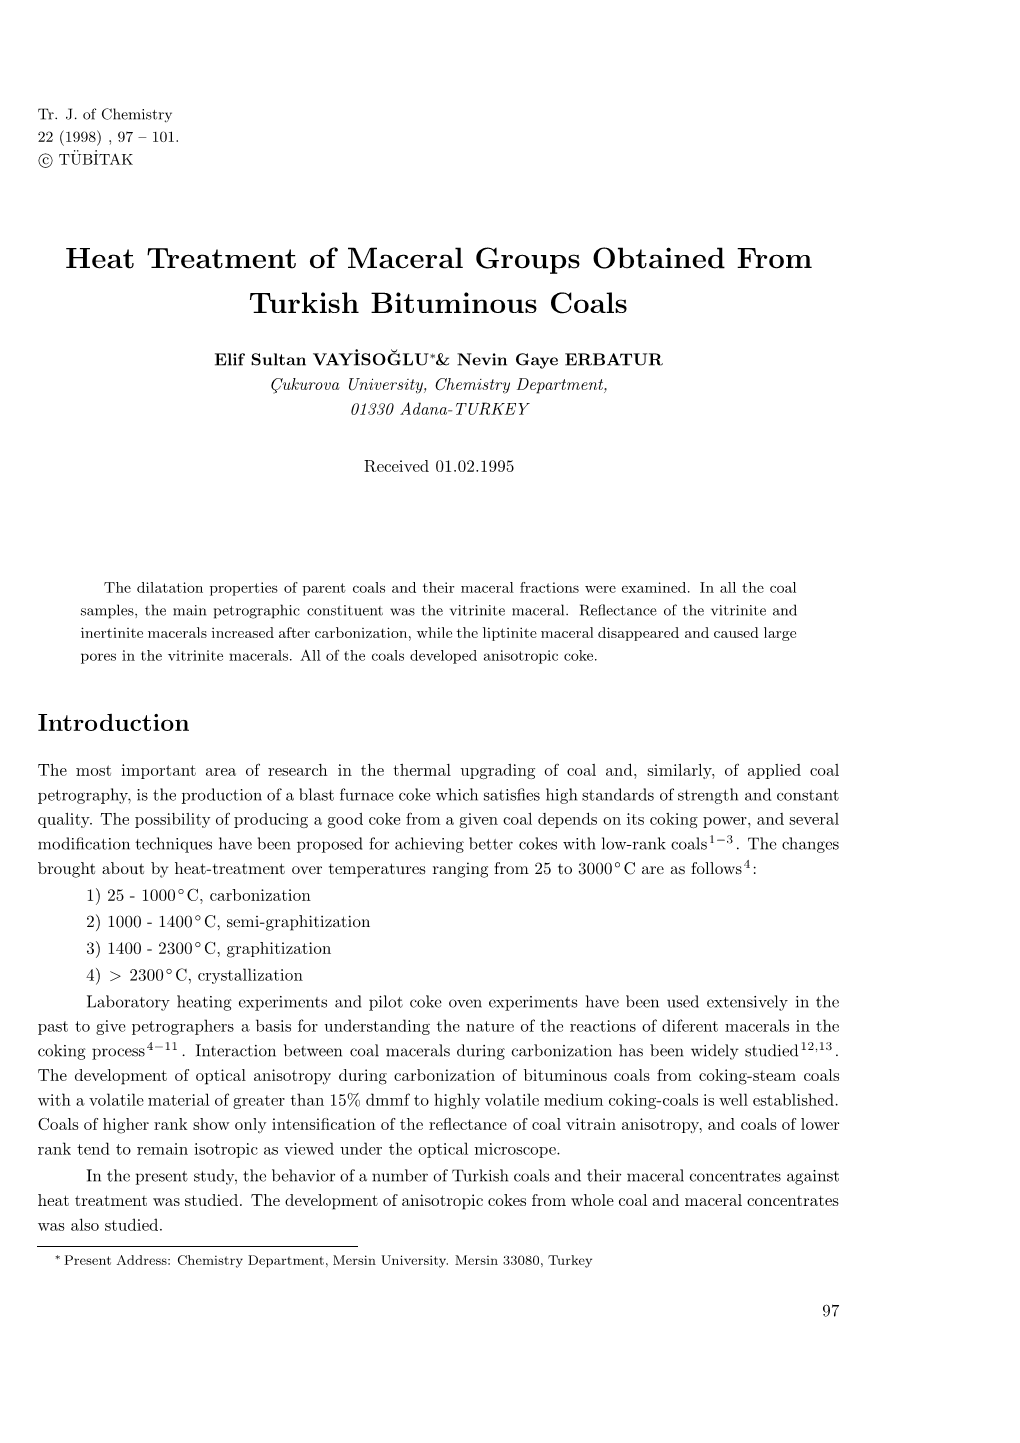 Heat Treatment of Maceral Groups Obtained from Turkish Bituminous Coals